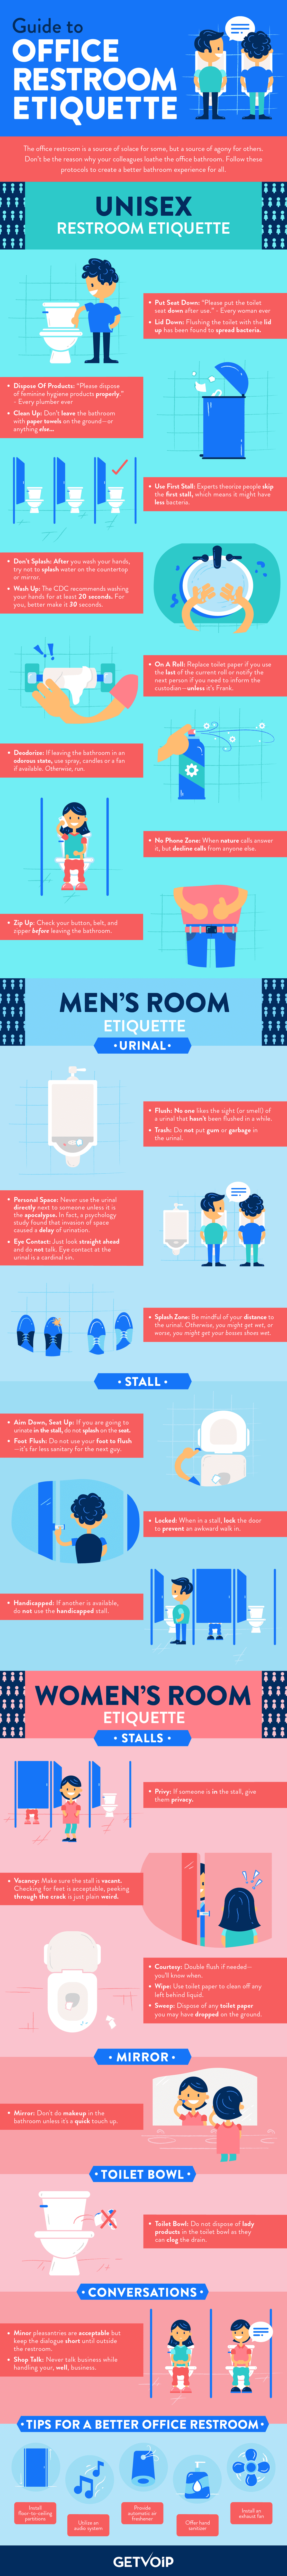 Guide to office bathroom etiquette 